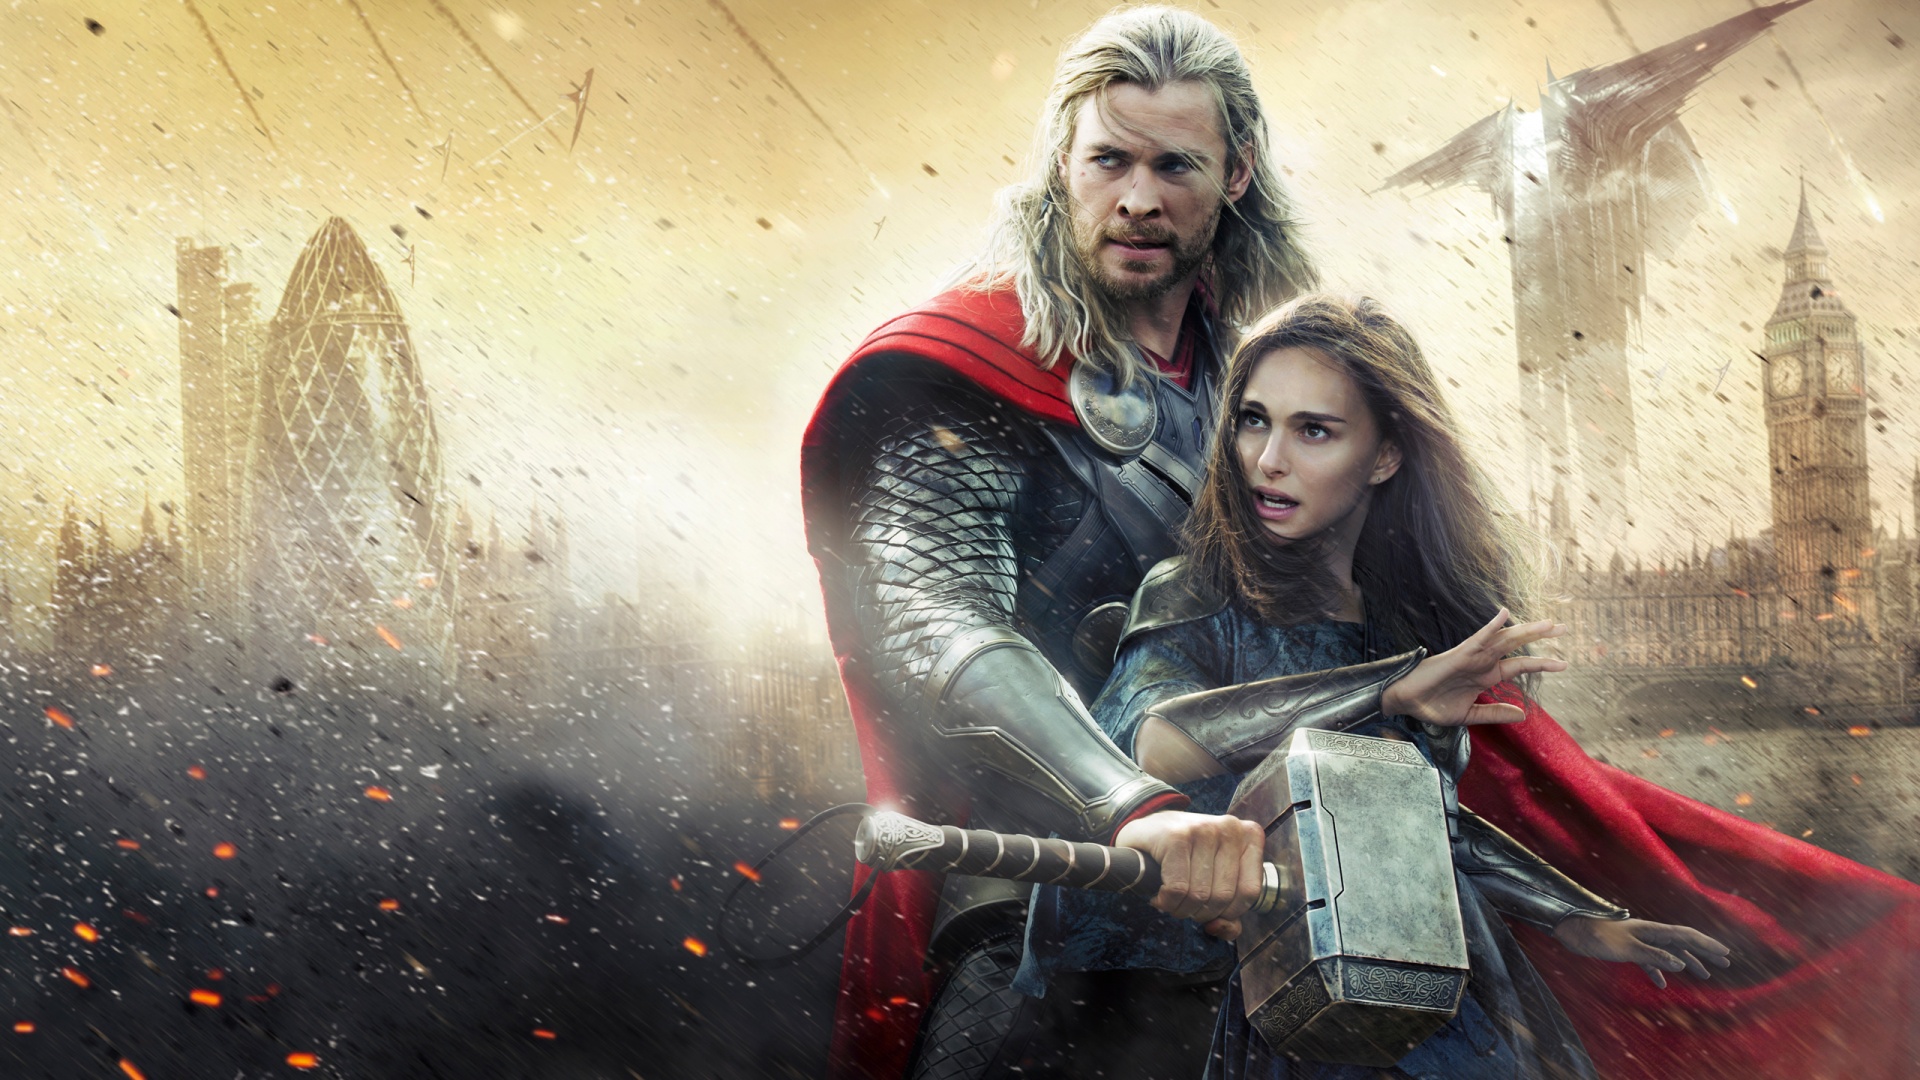 HD Wallpapers 1080p with Superheroes - Thor (4 of 23) - HD ...